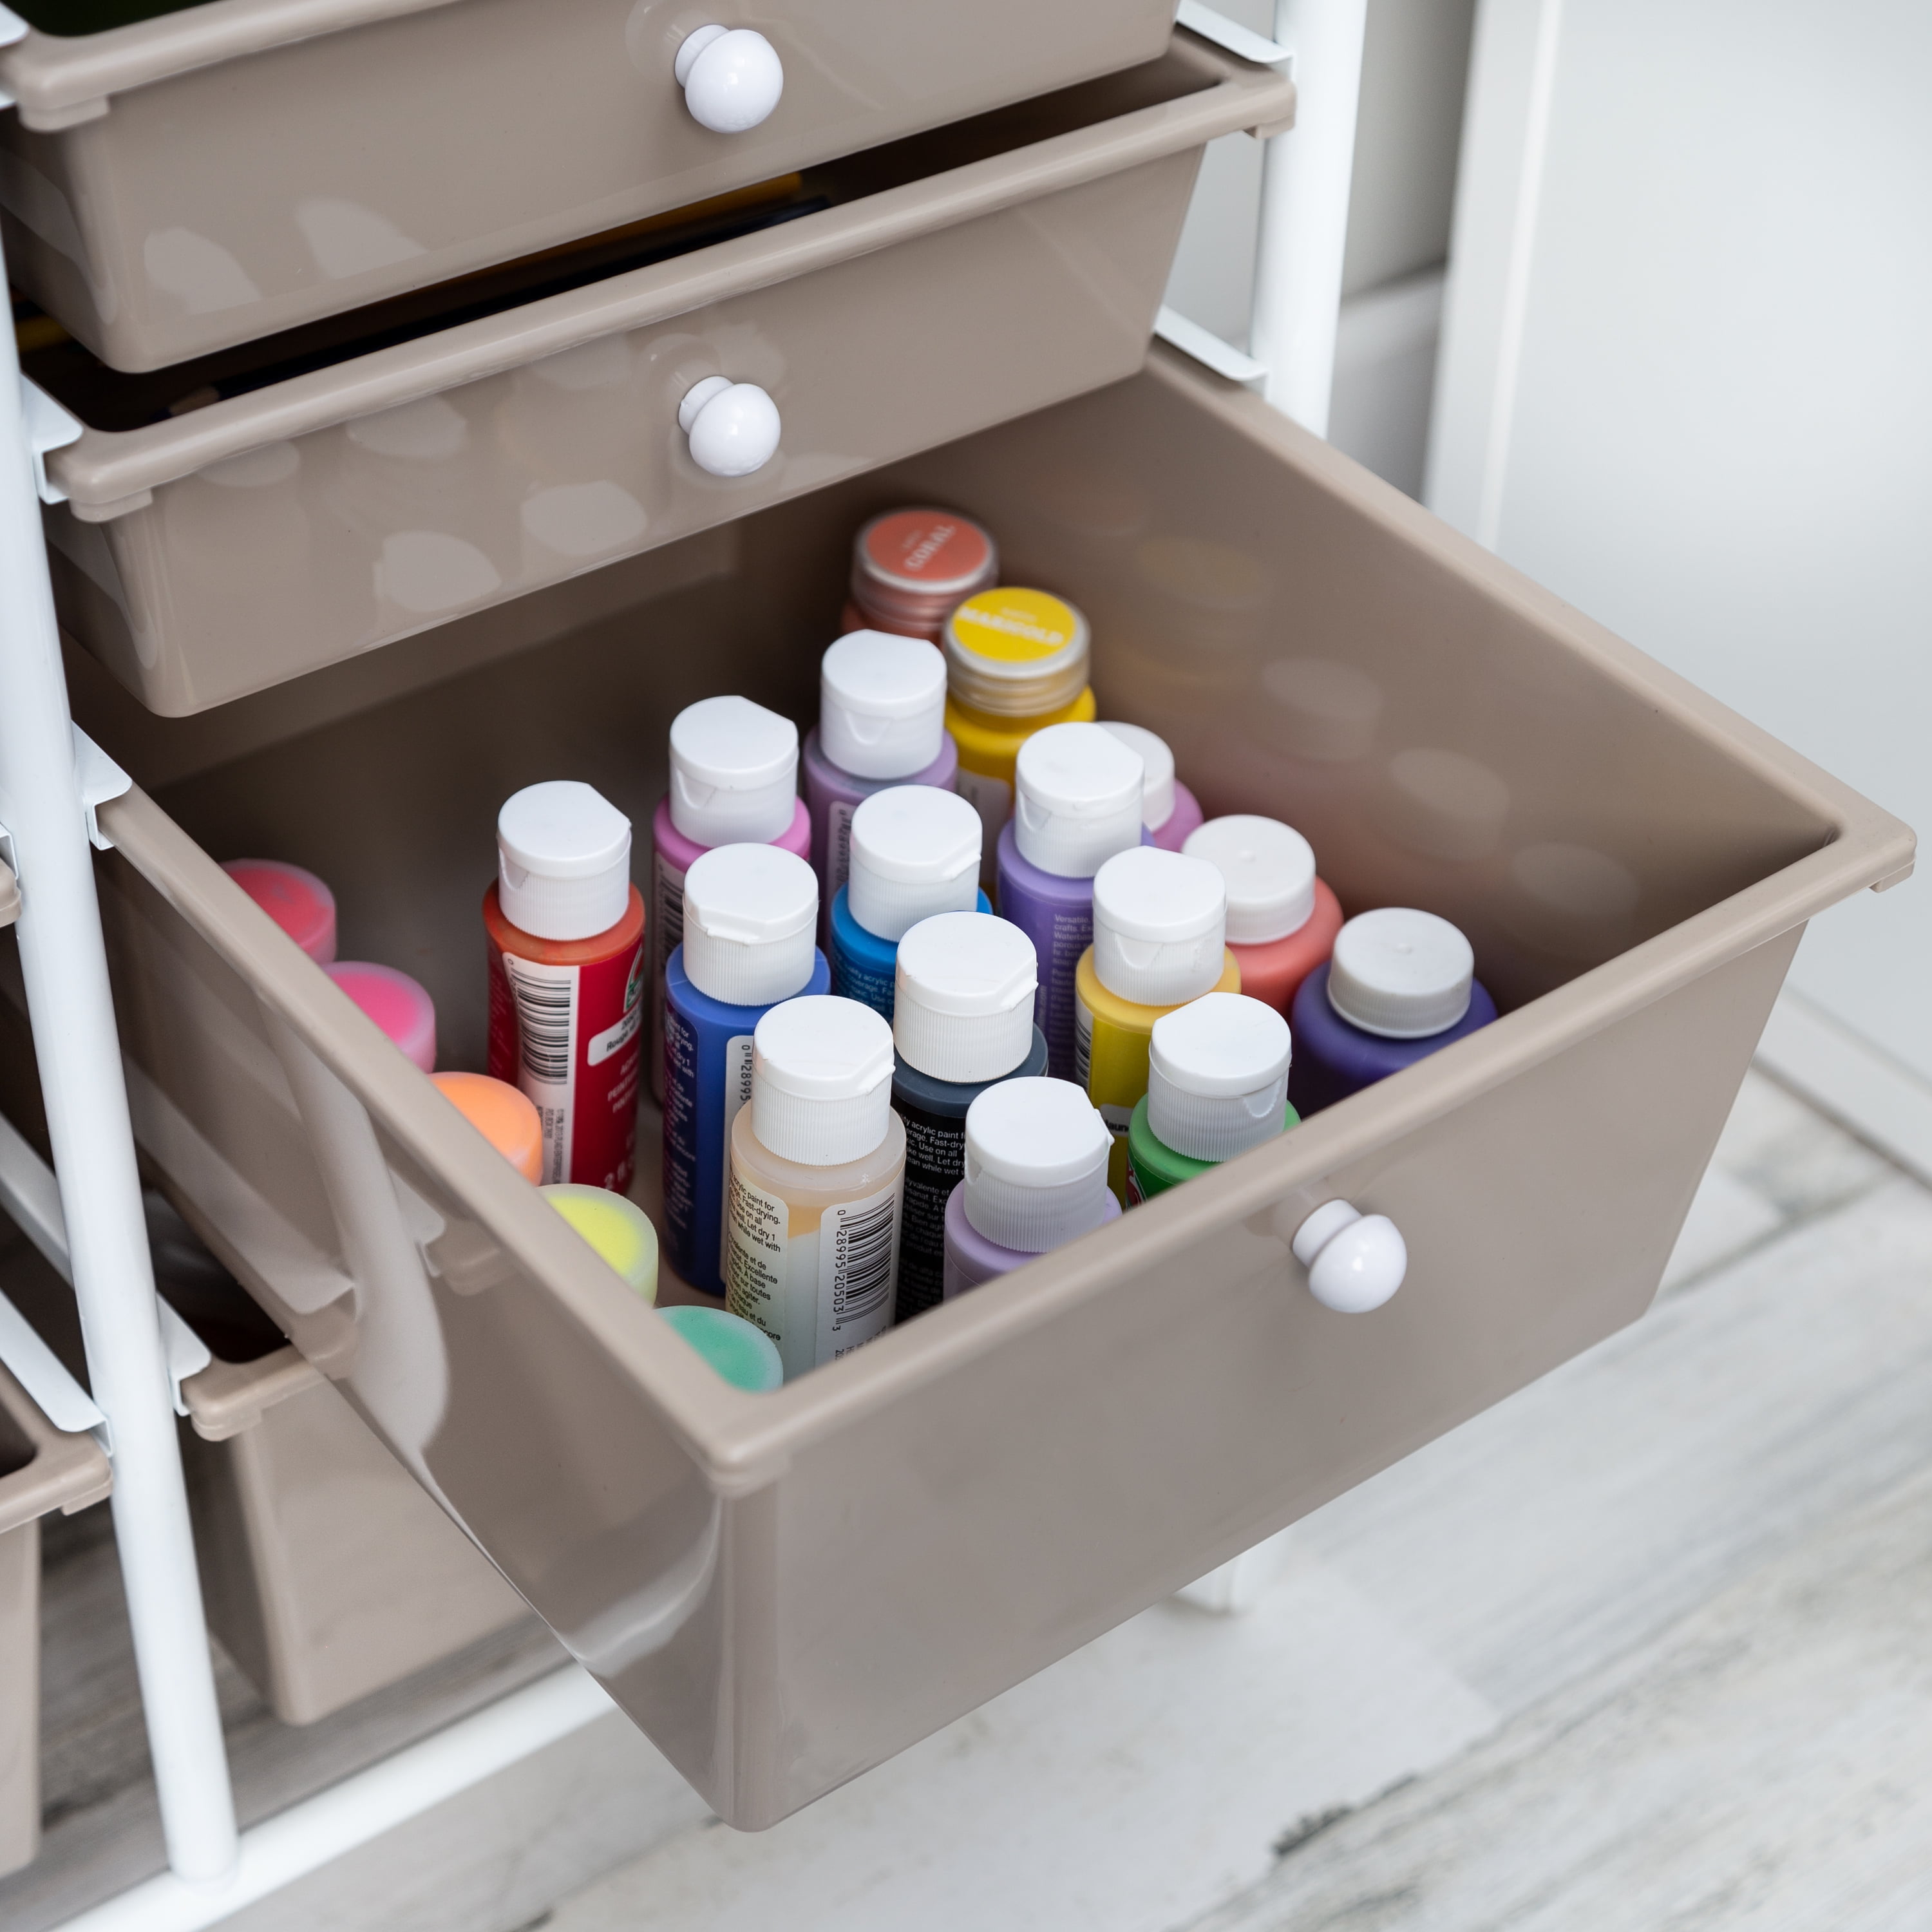  SILKYDRY Rolling Storage Cart with 12 Drawers